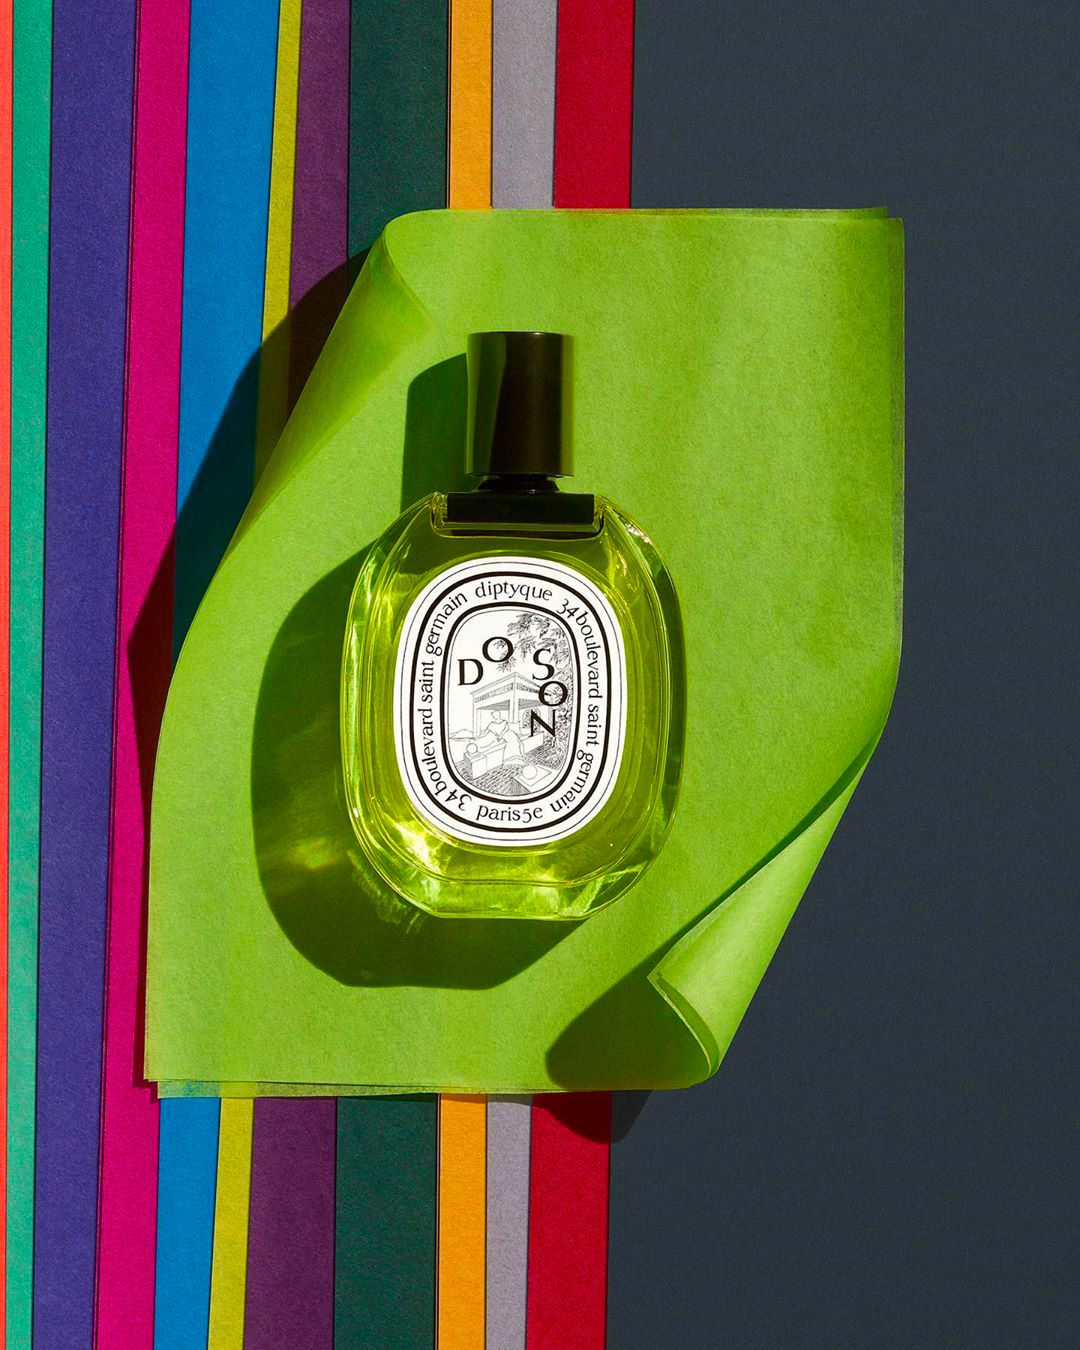 Diptyque Travel-Sized Perfume